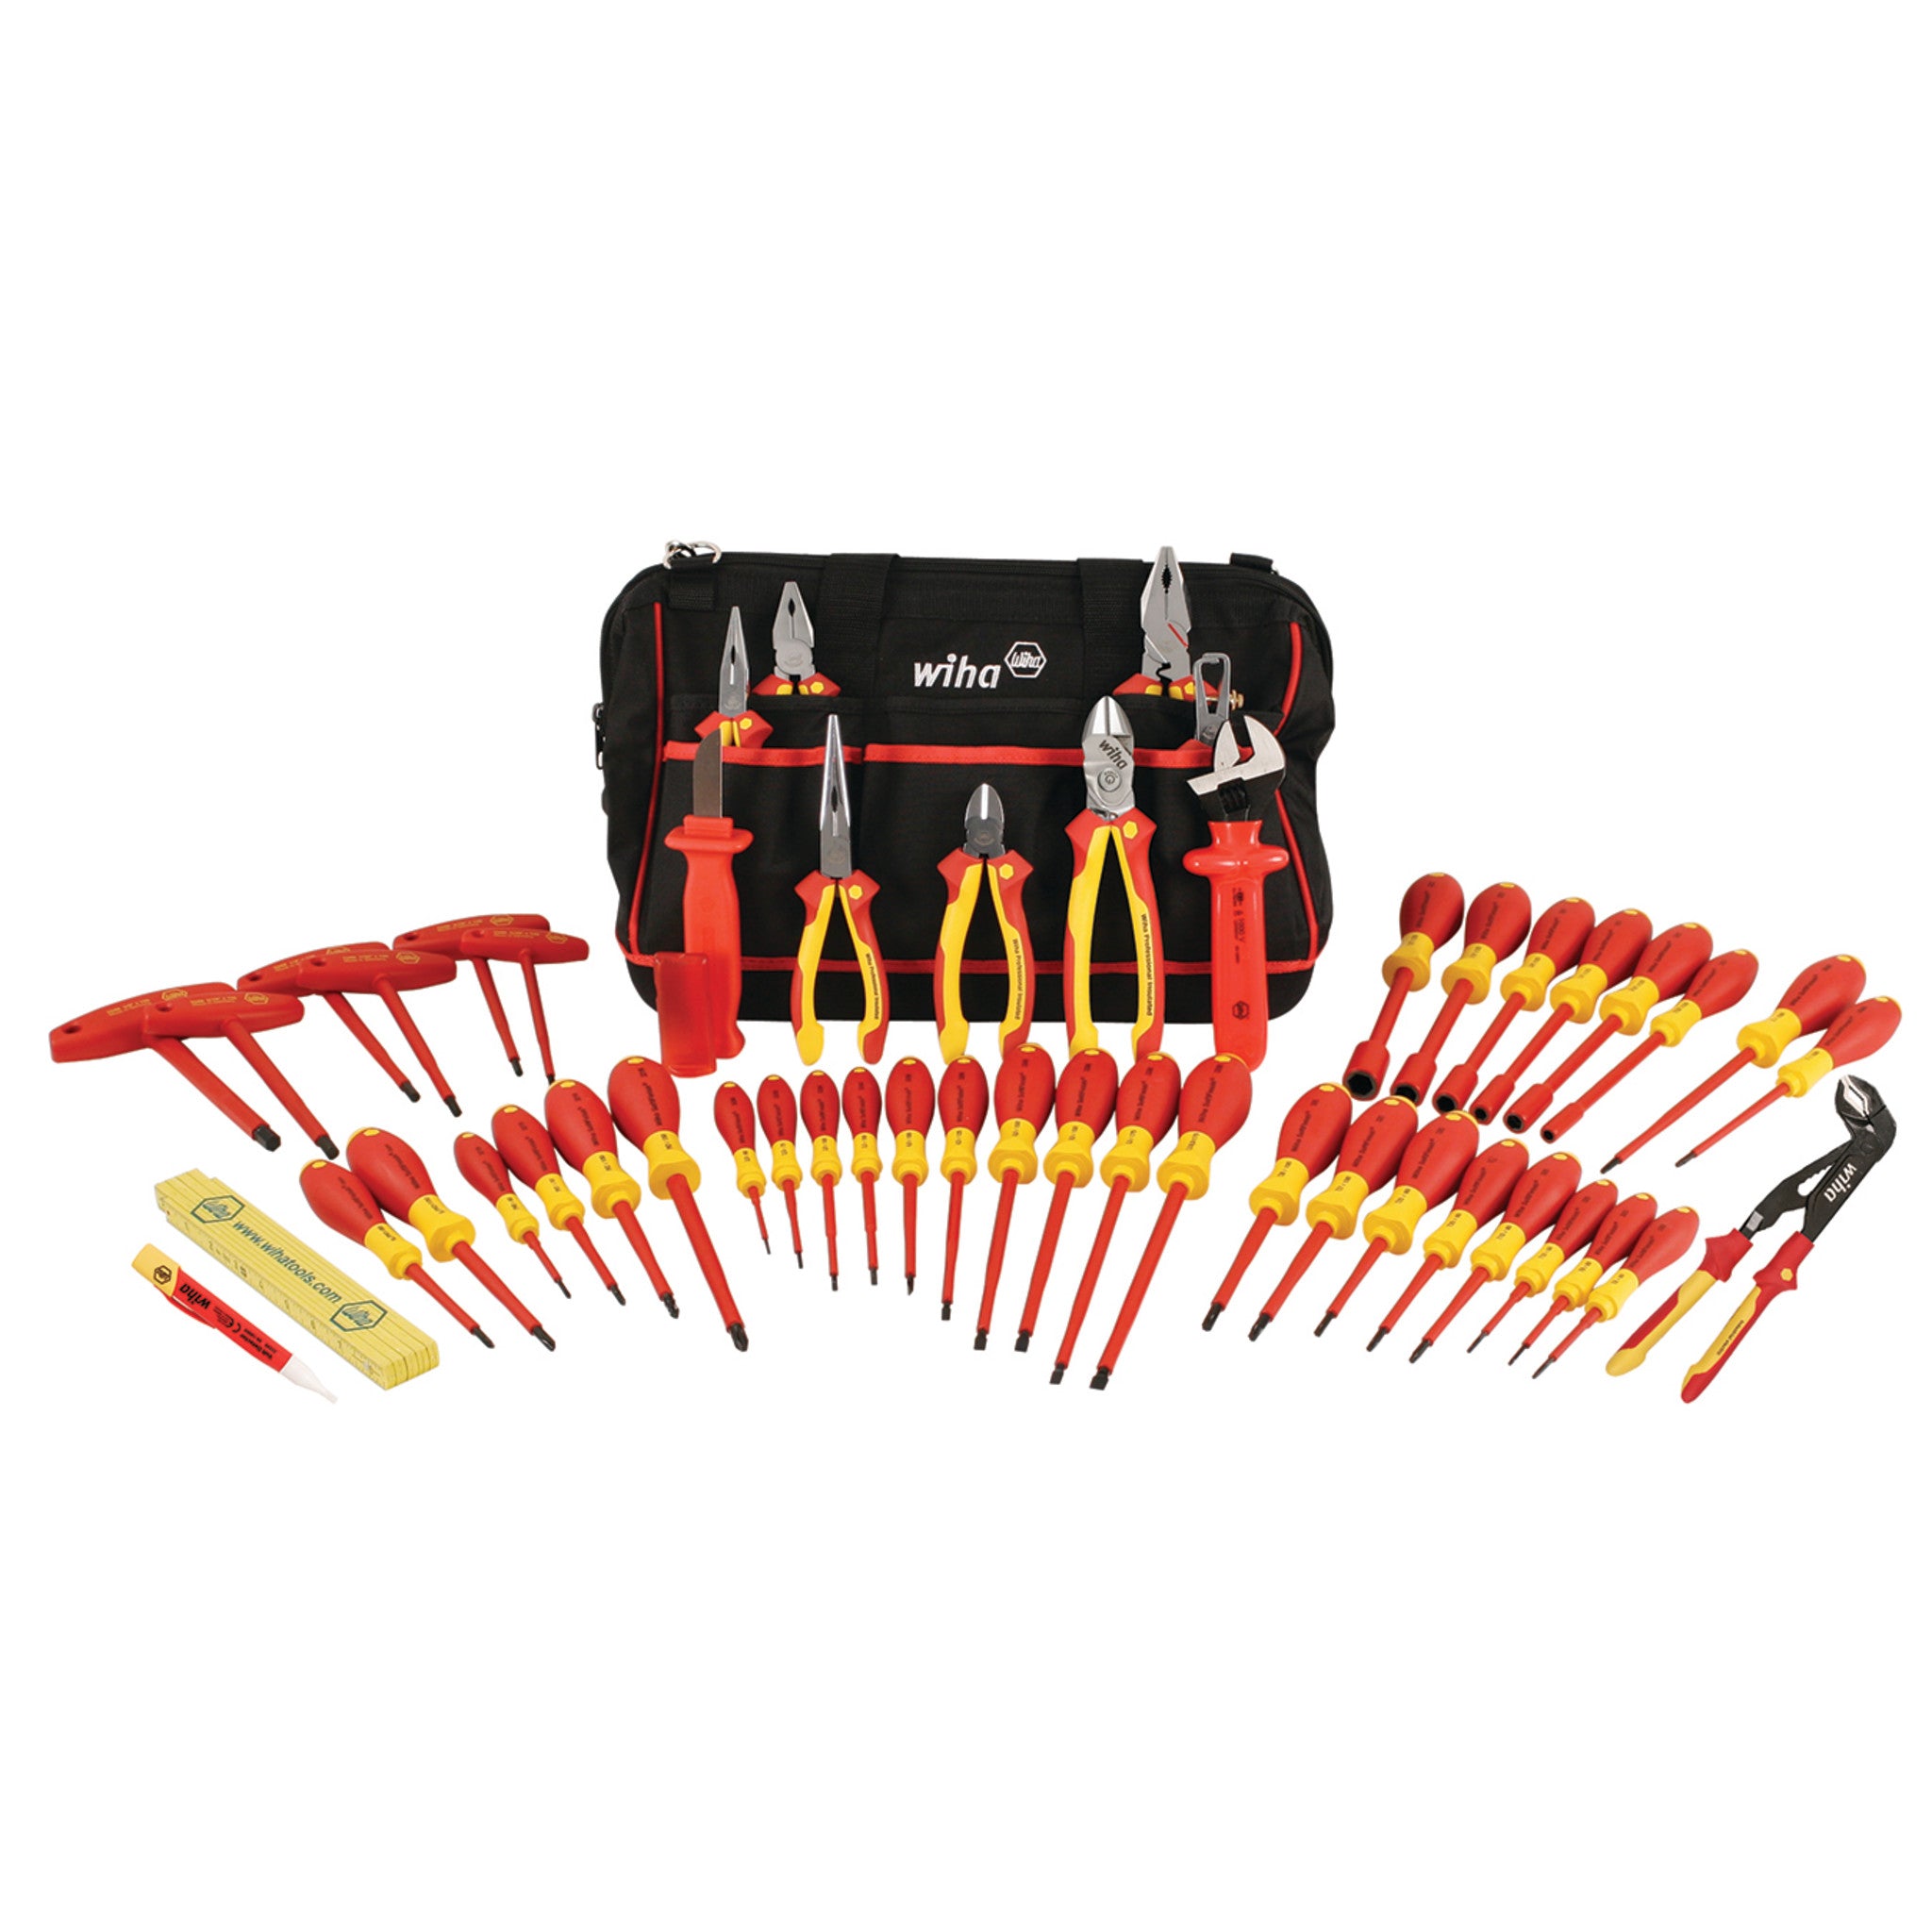 50 Piece Master Electrician's Insulated Tool Set In Canvas Tool Bag